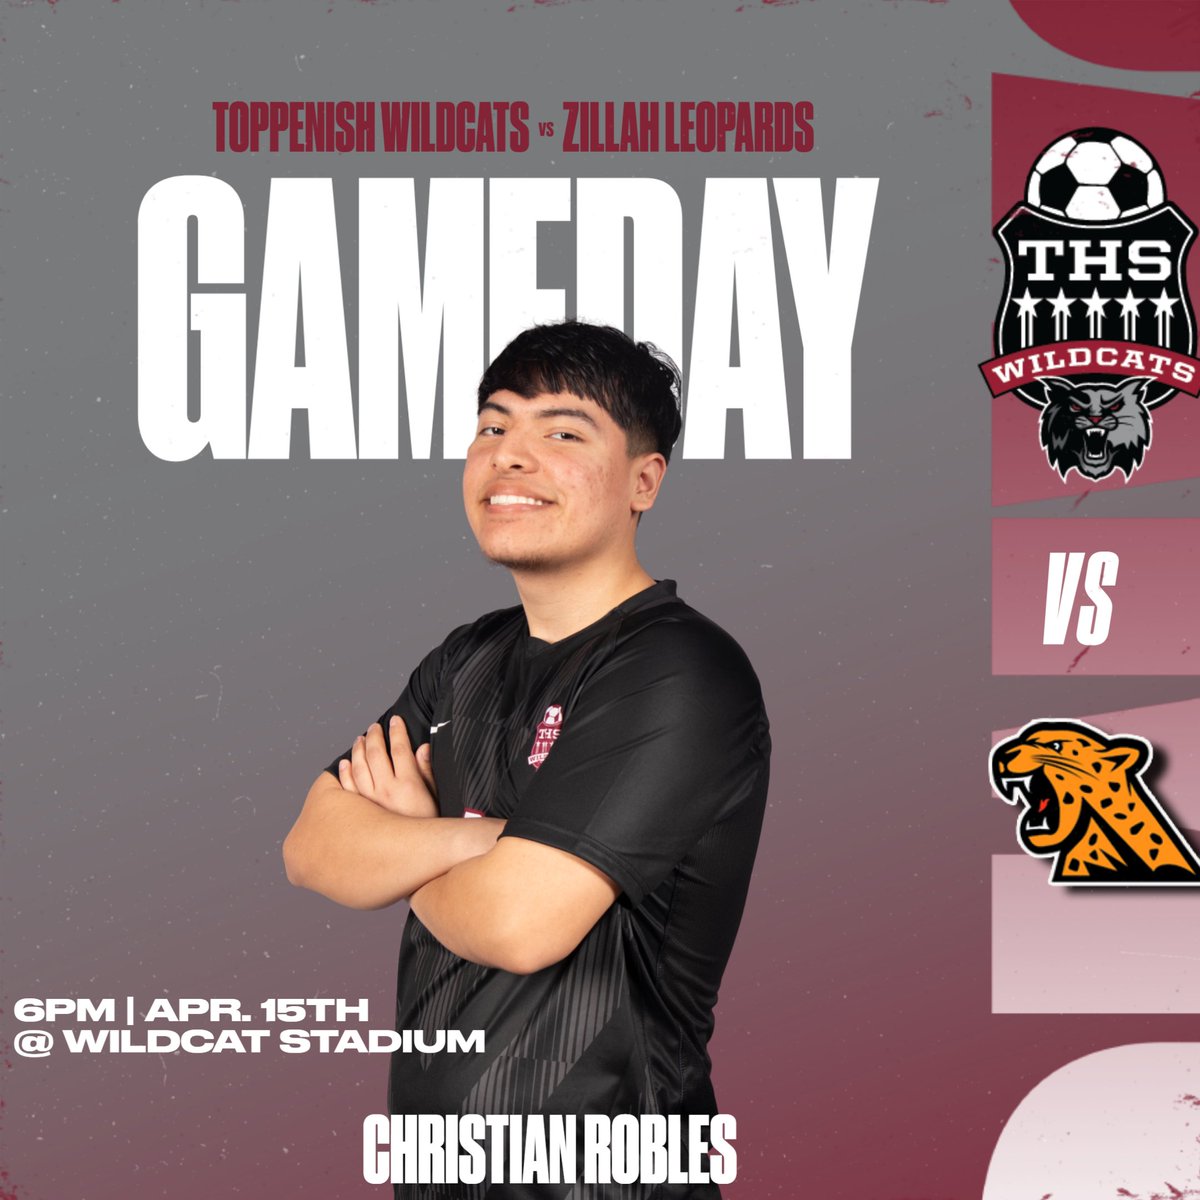 IT'S SENIOR NIGHT! The Wildcat soccer team hosts the Zillah Leopards on their Senior Night game! Kickoff is at 6:00pm at Wildcat Stadium! #WildcatNation